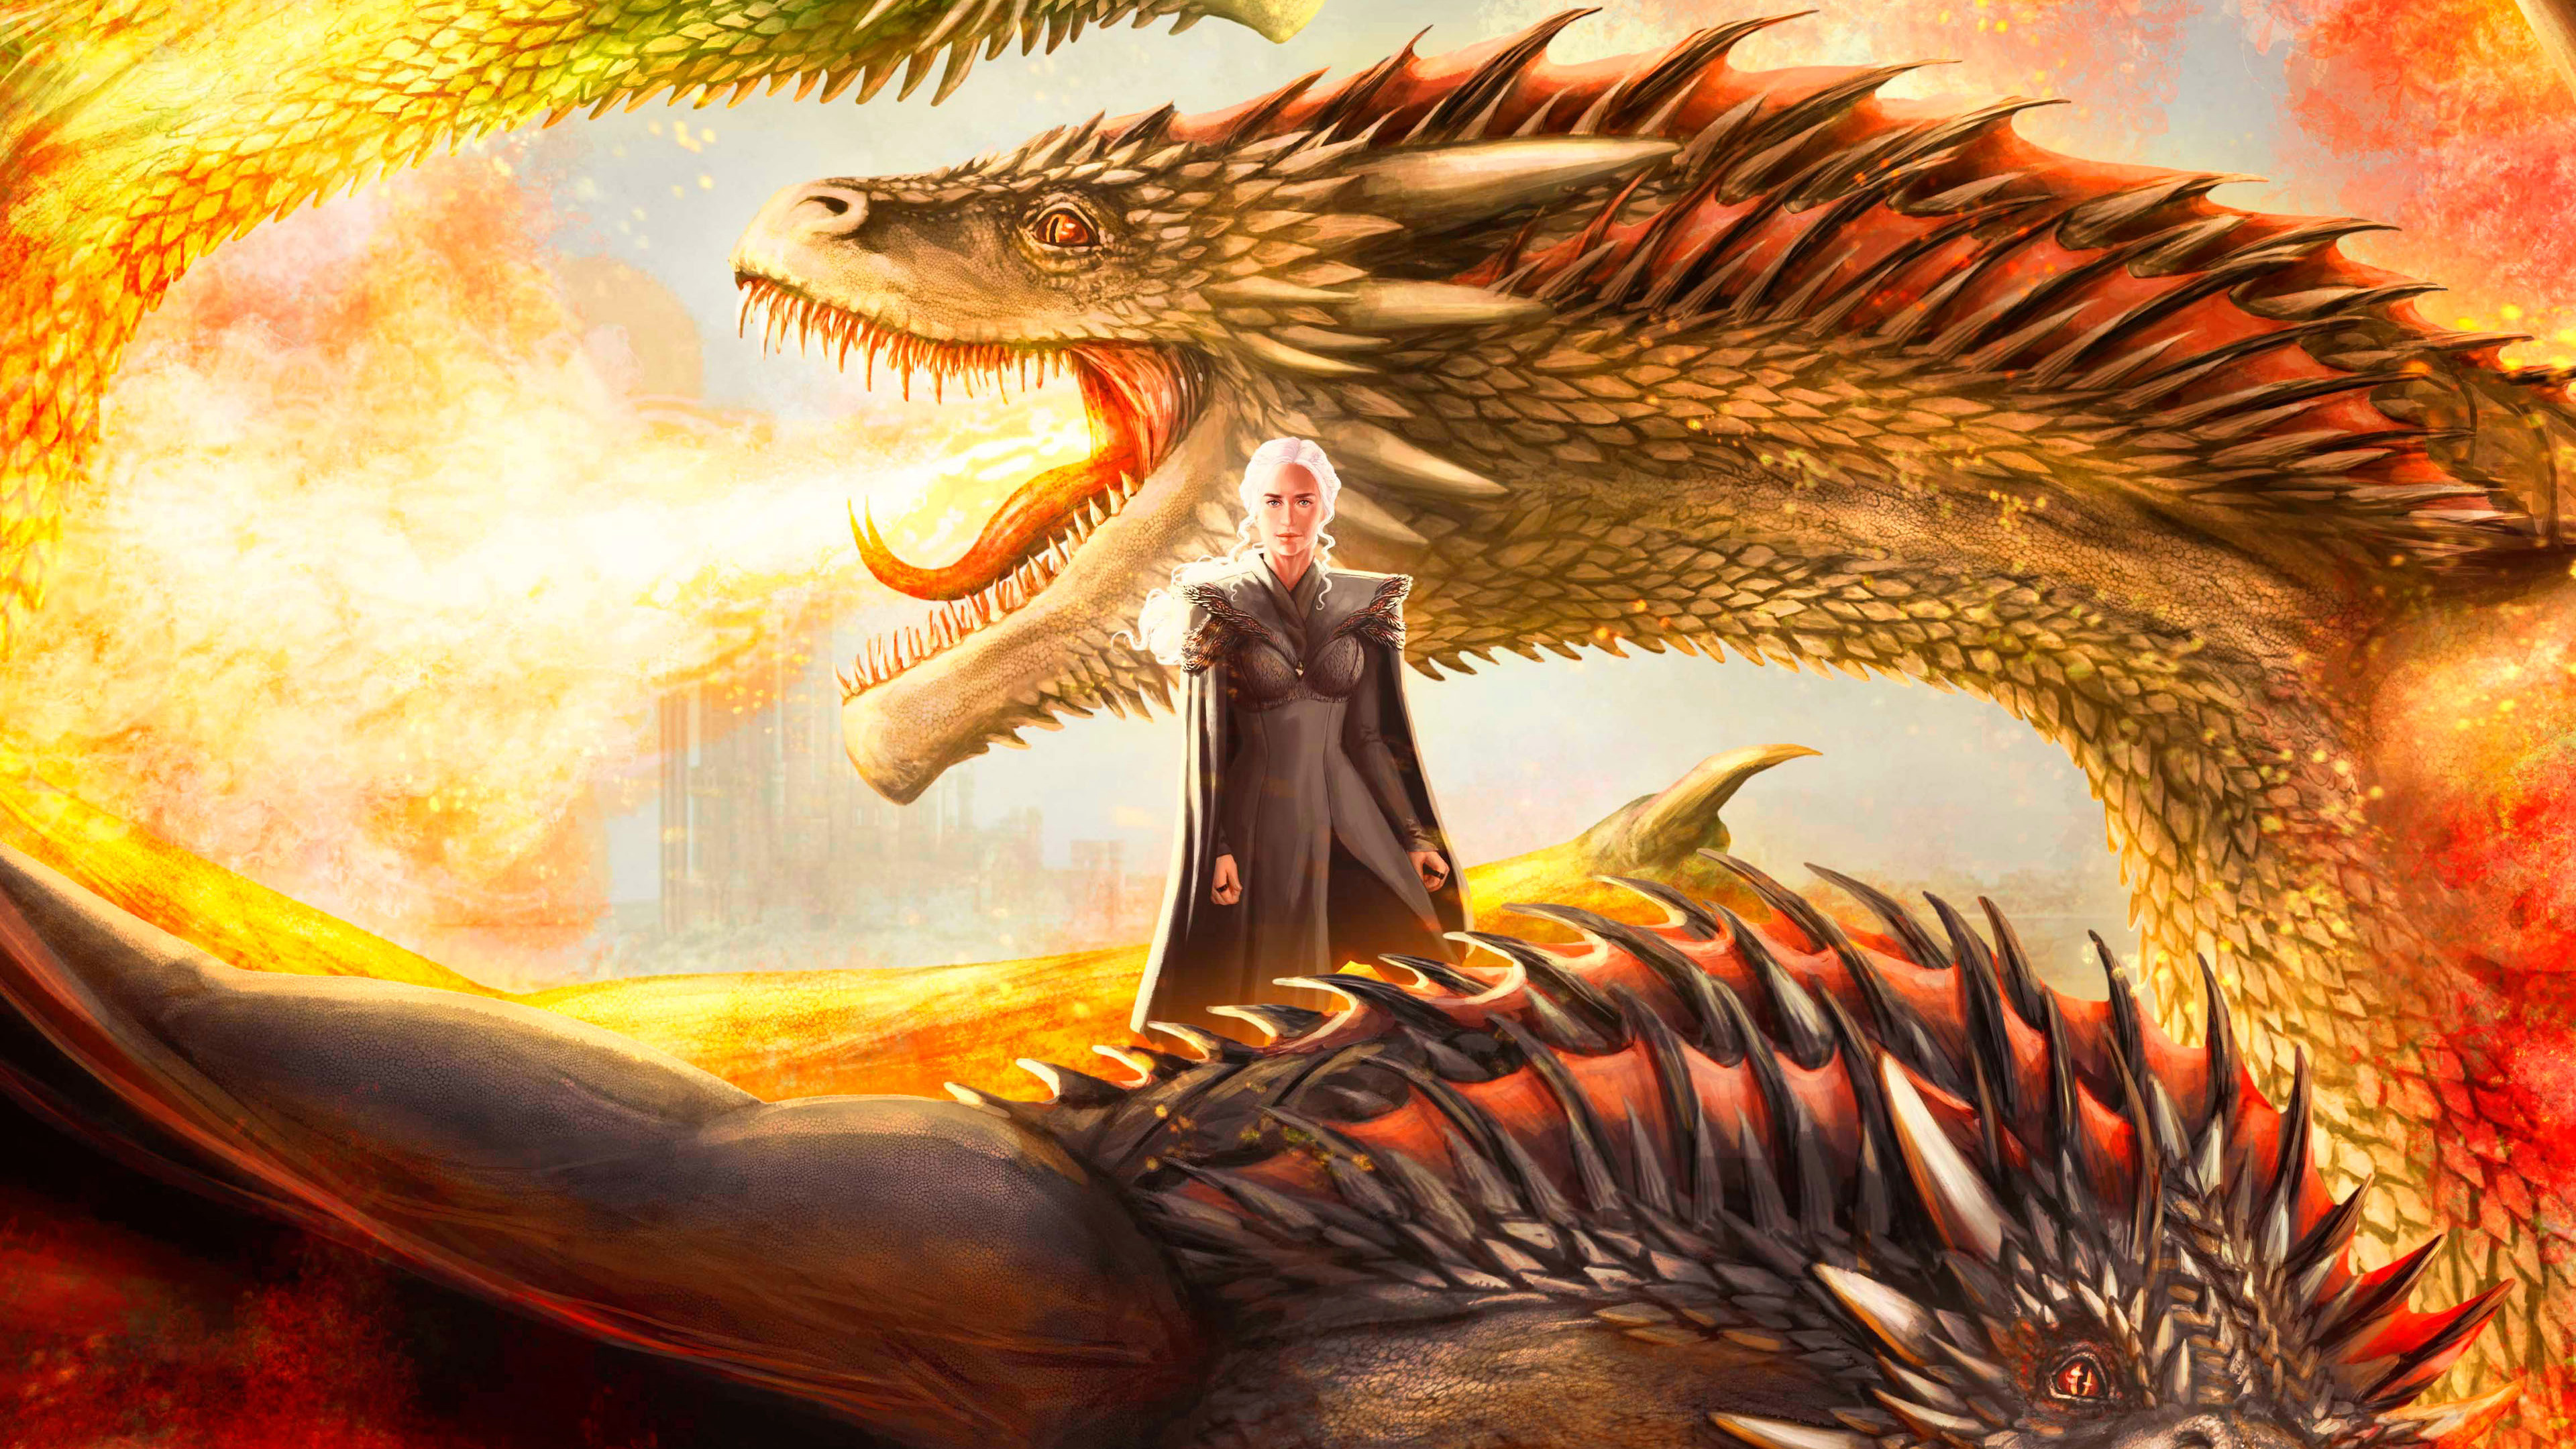 Game Of Thrones Ultra Hd 4k Wallpapers - Game Of Thrones Dragons Art -  3840x2160 Wallpaper 